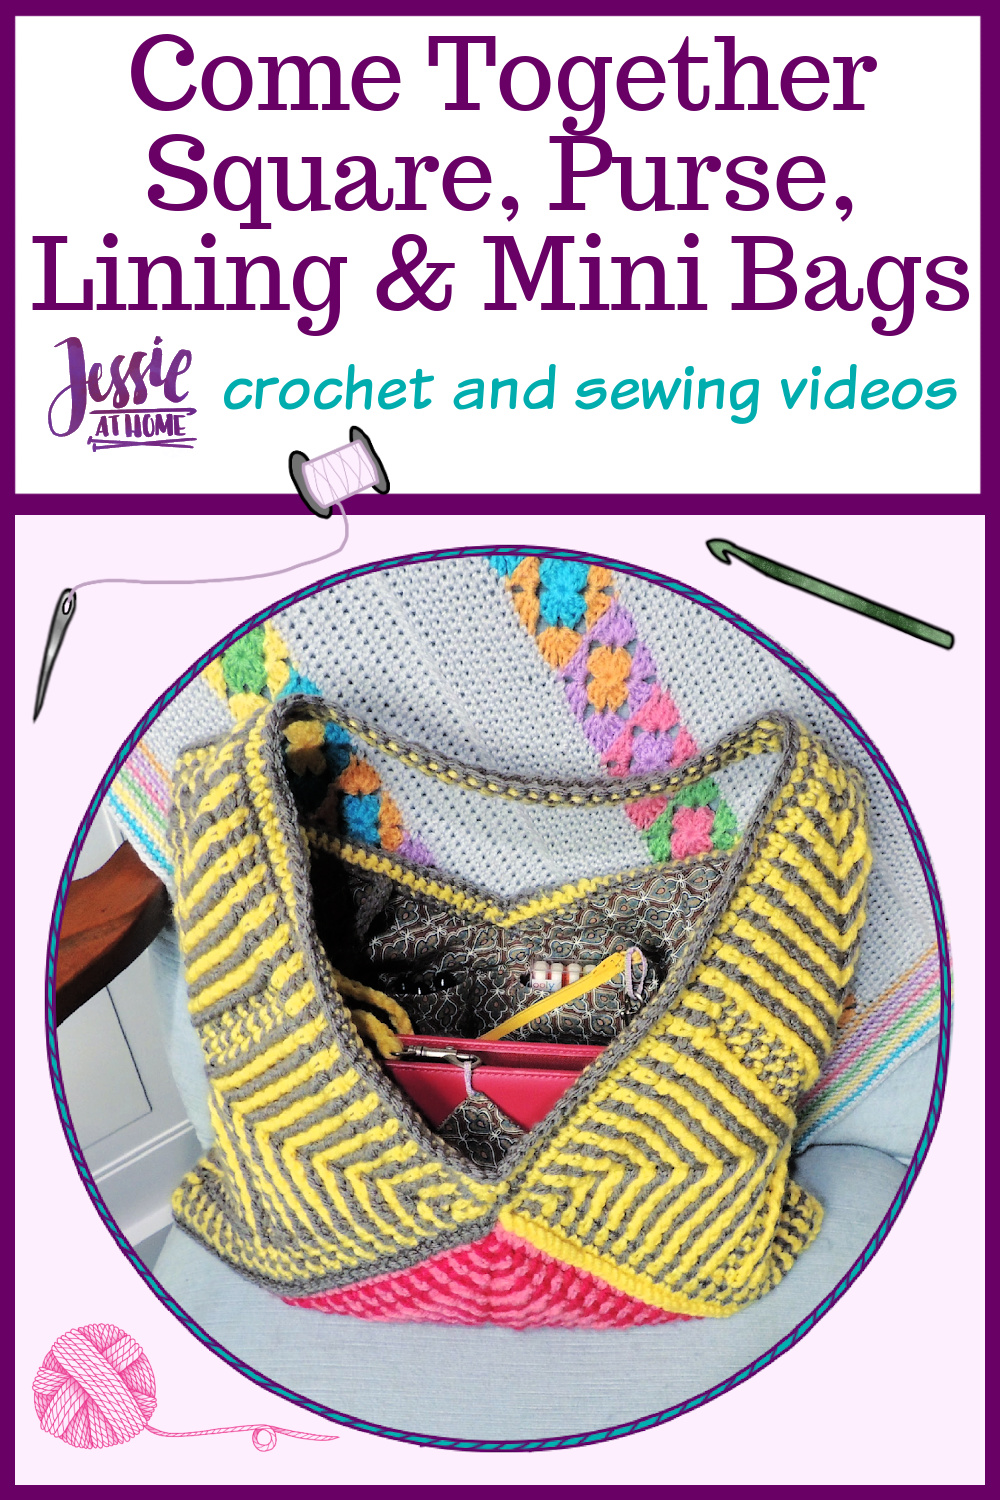 Come Together Video Tutorials - Square and Purse, including Lining & Mini Bags